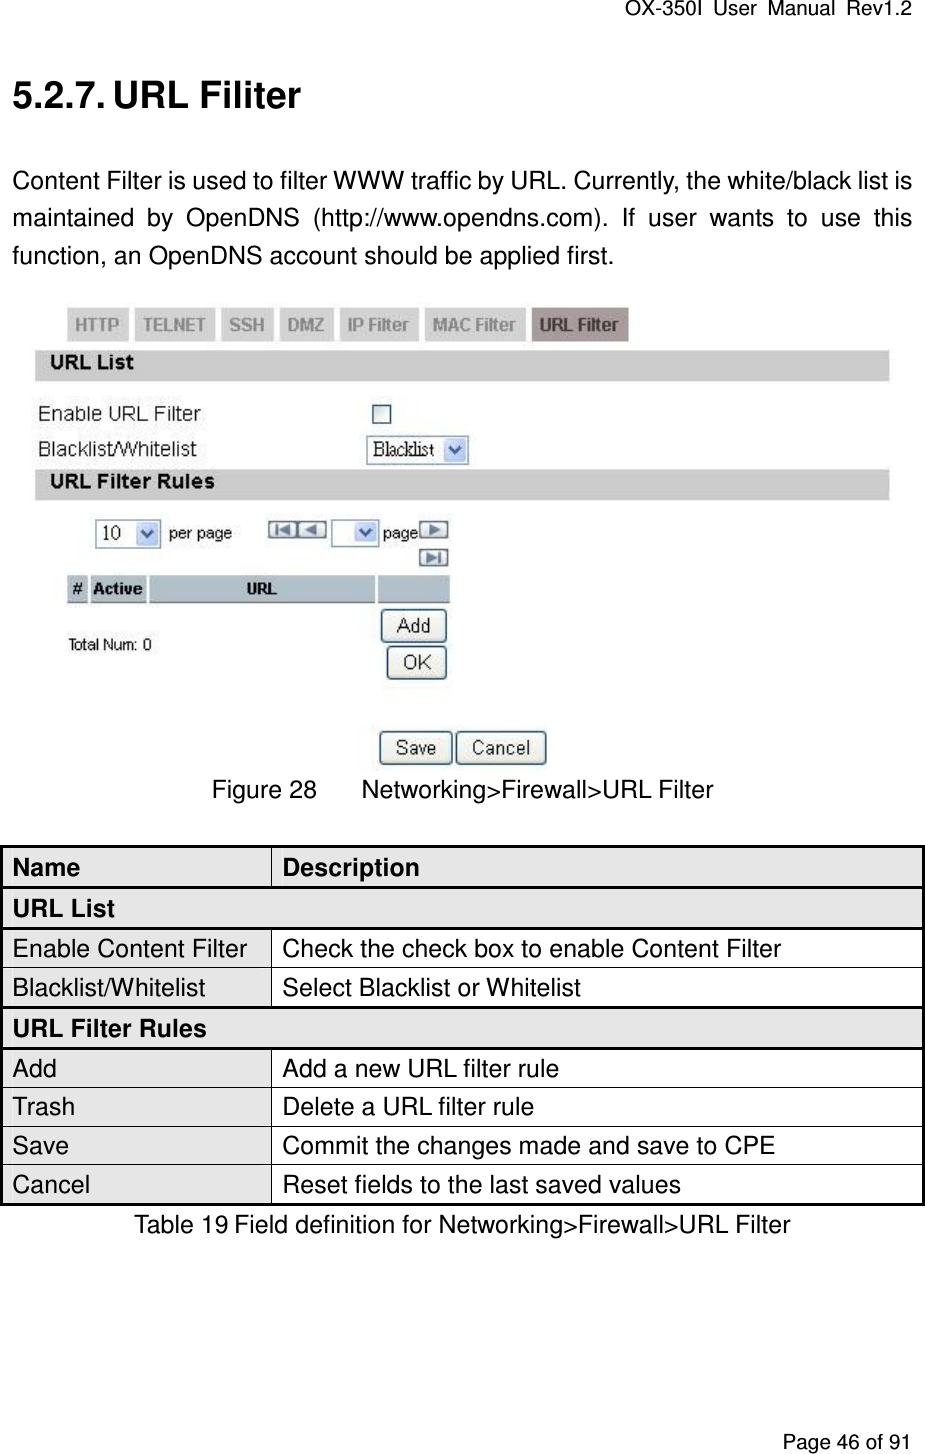 OX-350I  User  Manual  Rev1.2 Page 46 of 91 5.2.7. URL Filiter Content Filter is used to filter WWW traffic by URL. Currently, the white/black list is maintained  by  OpenDNS  (http://www.opendns.com).  If  user  wants  to  use  this function, an OpenDNS account should be applied first.  Figure 28  Networking&gt;Firewall&gt;URL Filter Name  Description URL List Enable Content Filter  Check the check box to enable Content Filter Blacklist/Whitelist  Select Blacklist or Whitelist URL Filter Rules Add  Add a new URL filter rule Trash  Delete a URL filter rule Save  Commit the changes made and save to CPE Cancel  Reset fields to the last saved values Table 19 Field definition for Networking&gt;Firewall&gt;URL Filter 